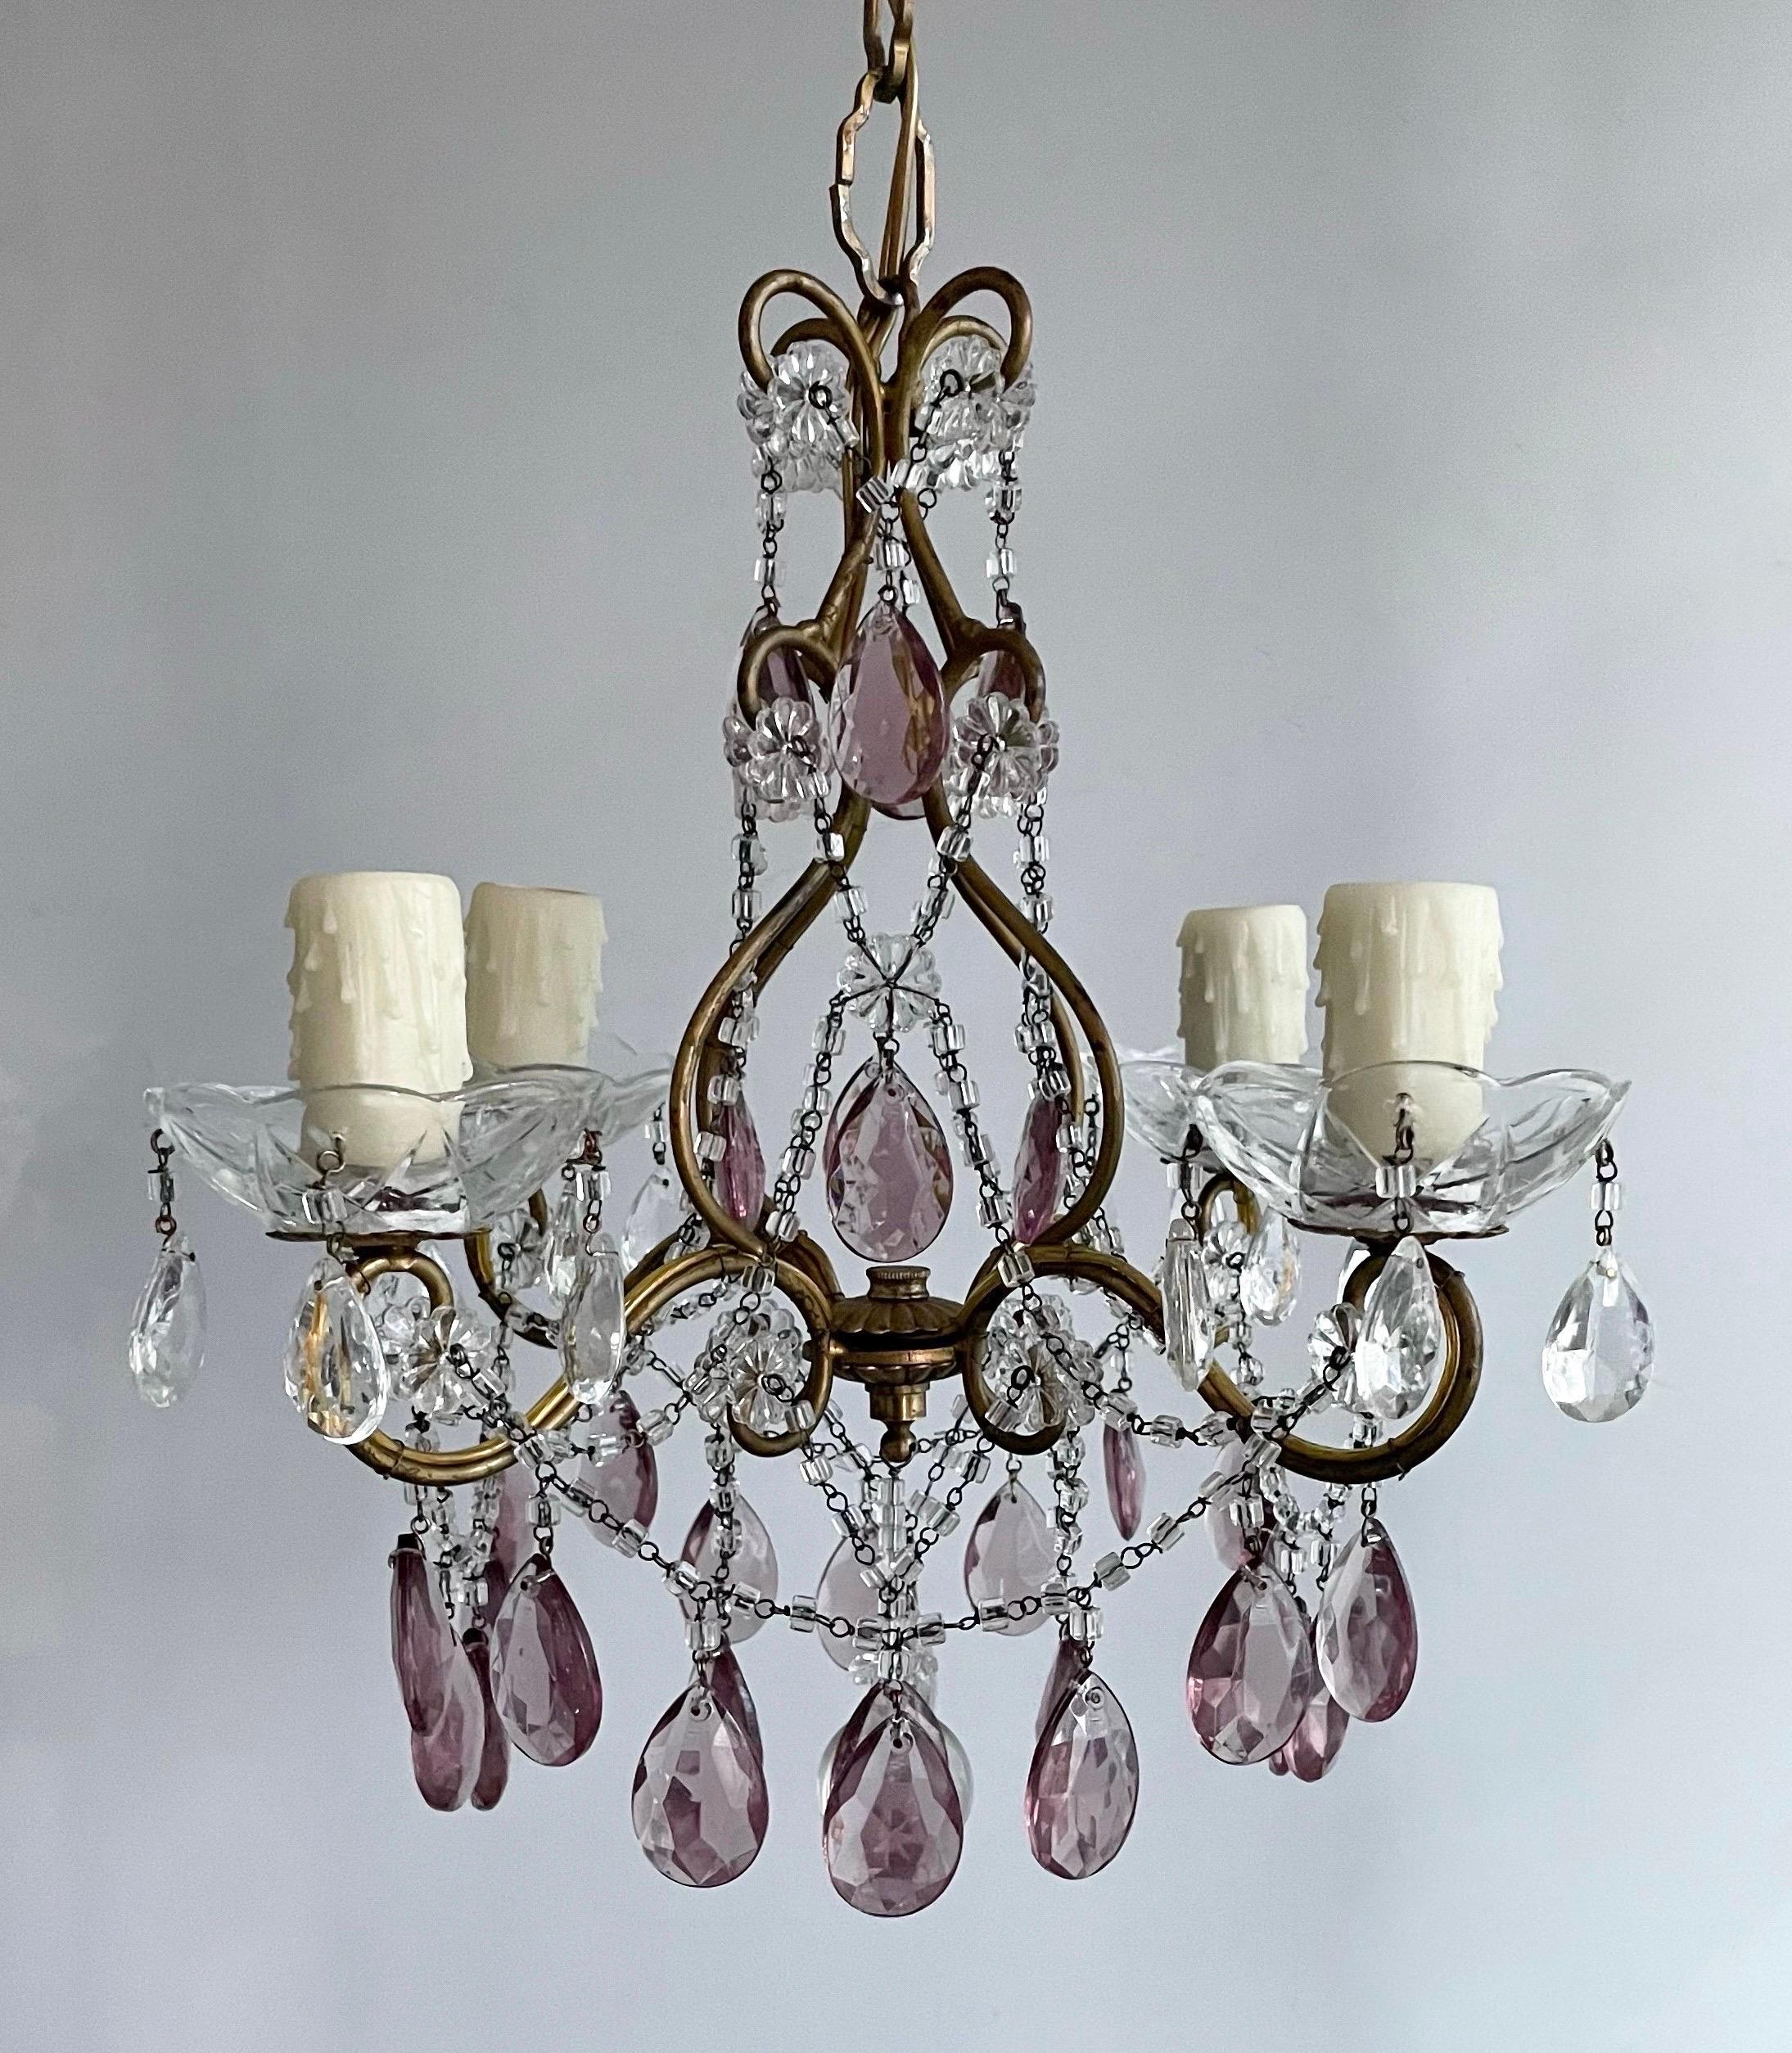 Gorgeous, petite Italian 1940s gilt-iron and crystal chandelier.

The chandelier consists of a delicately scrolled gilded iron frame decorated with crystal beads and light amethyst glass prisms.

The chandelier is wired and in working condition, it